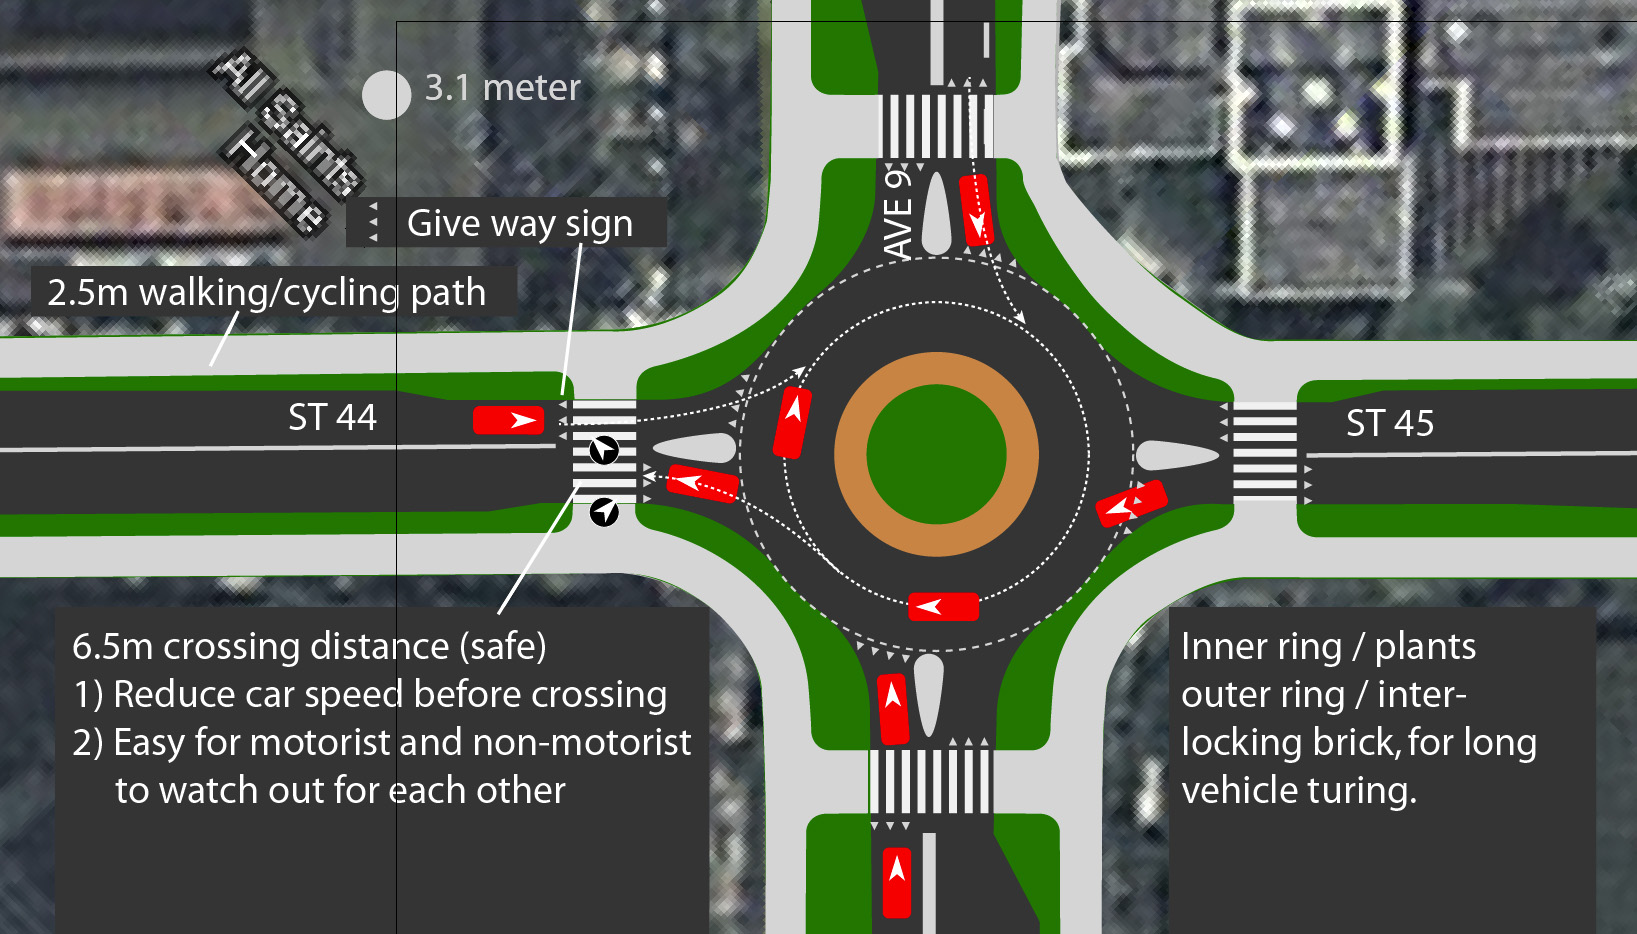 Dutch style roundabout - a safer intersection design